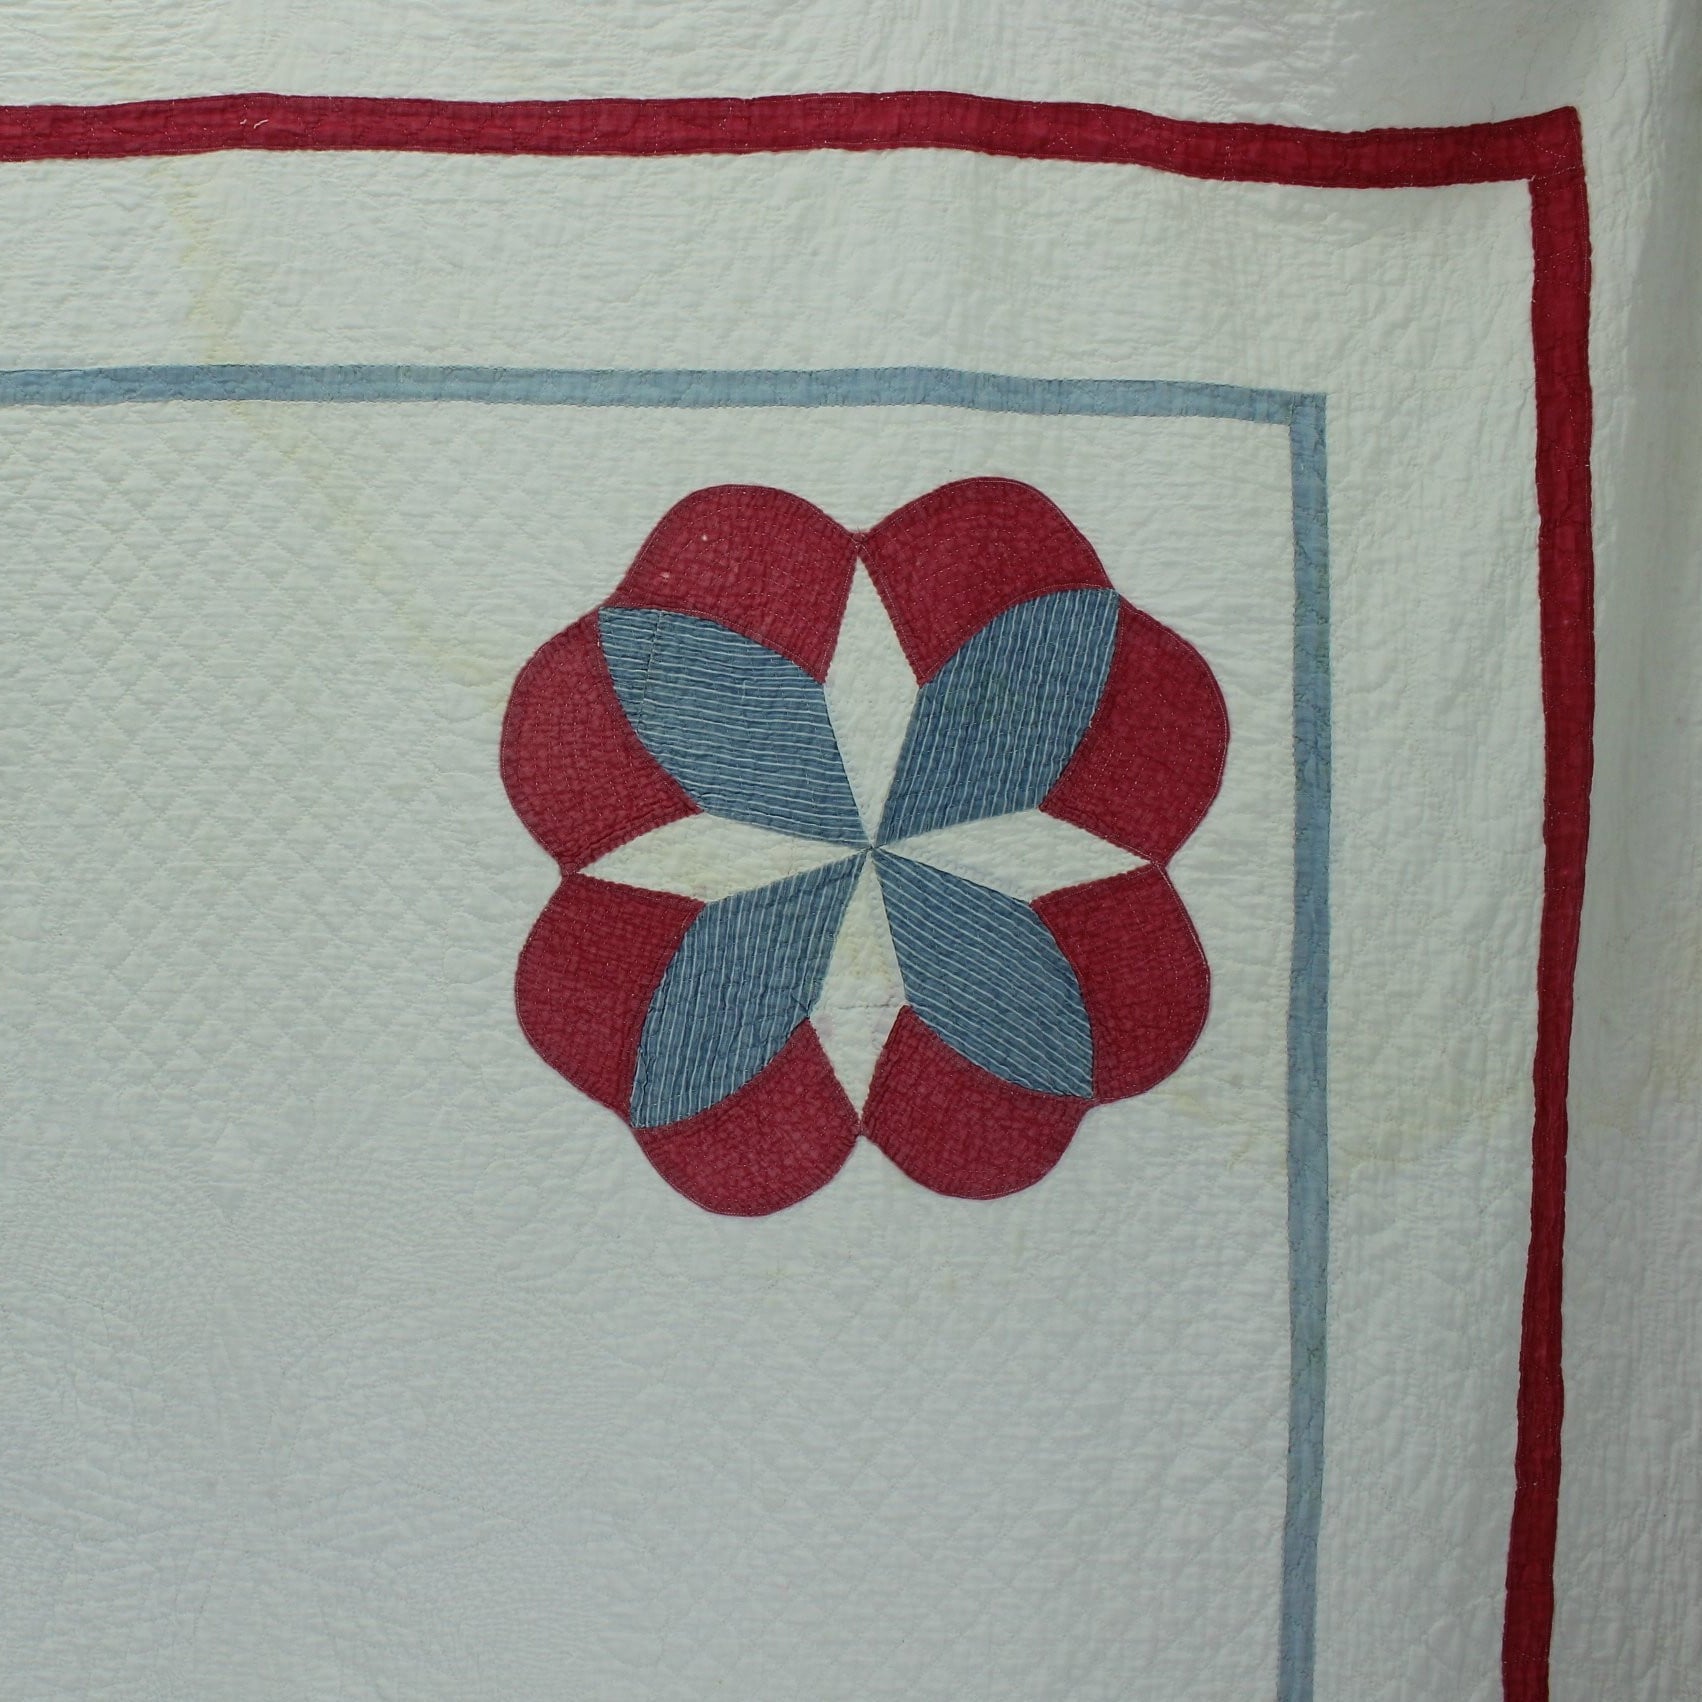 Antique Intricate Hand Stitched Quilt - Early 1900s Cotton Red Blue 9 Design - Natural Cotton Fill - Olde Kitchen & Home